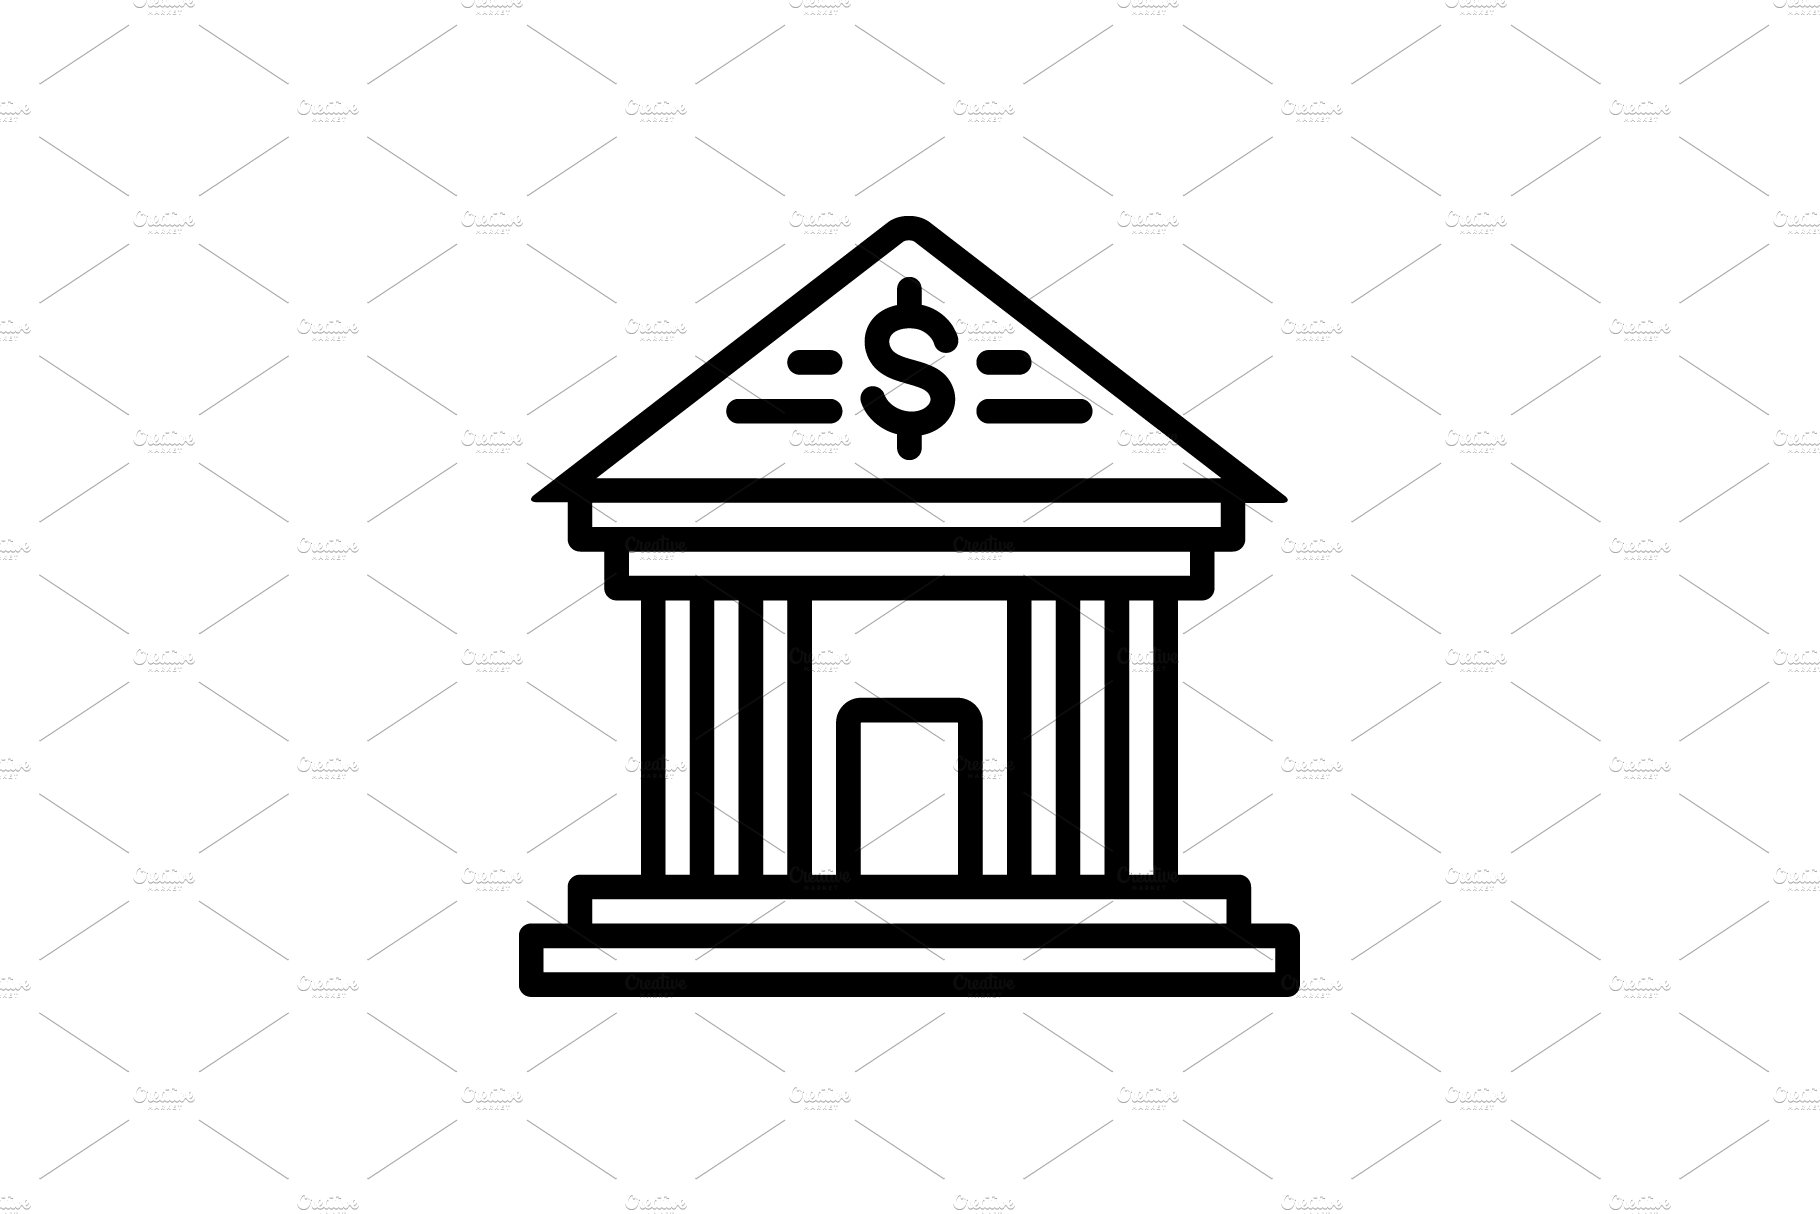 Bank building icon cover image.